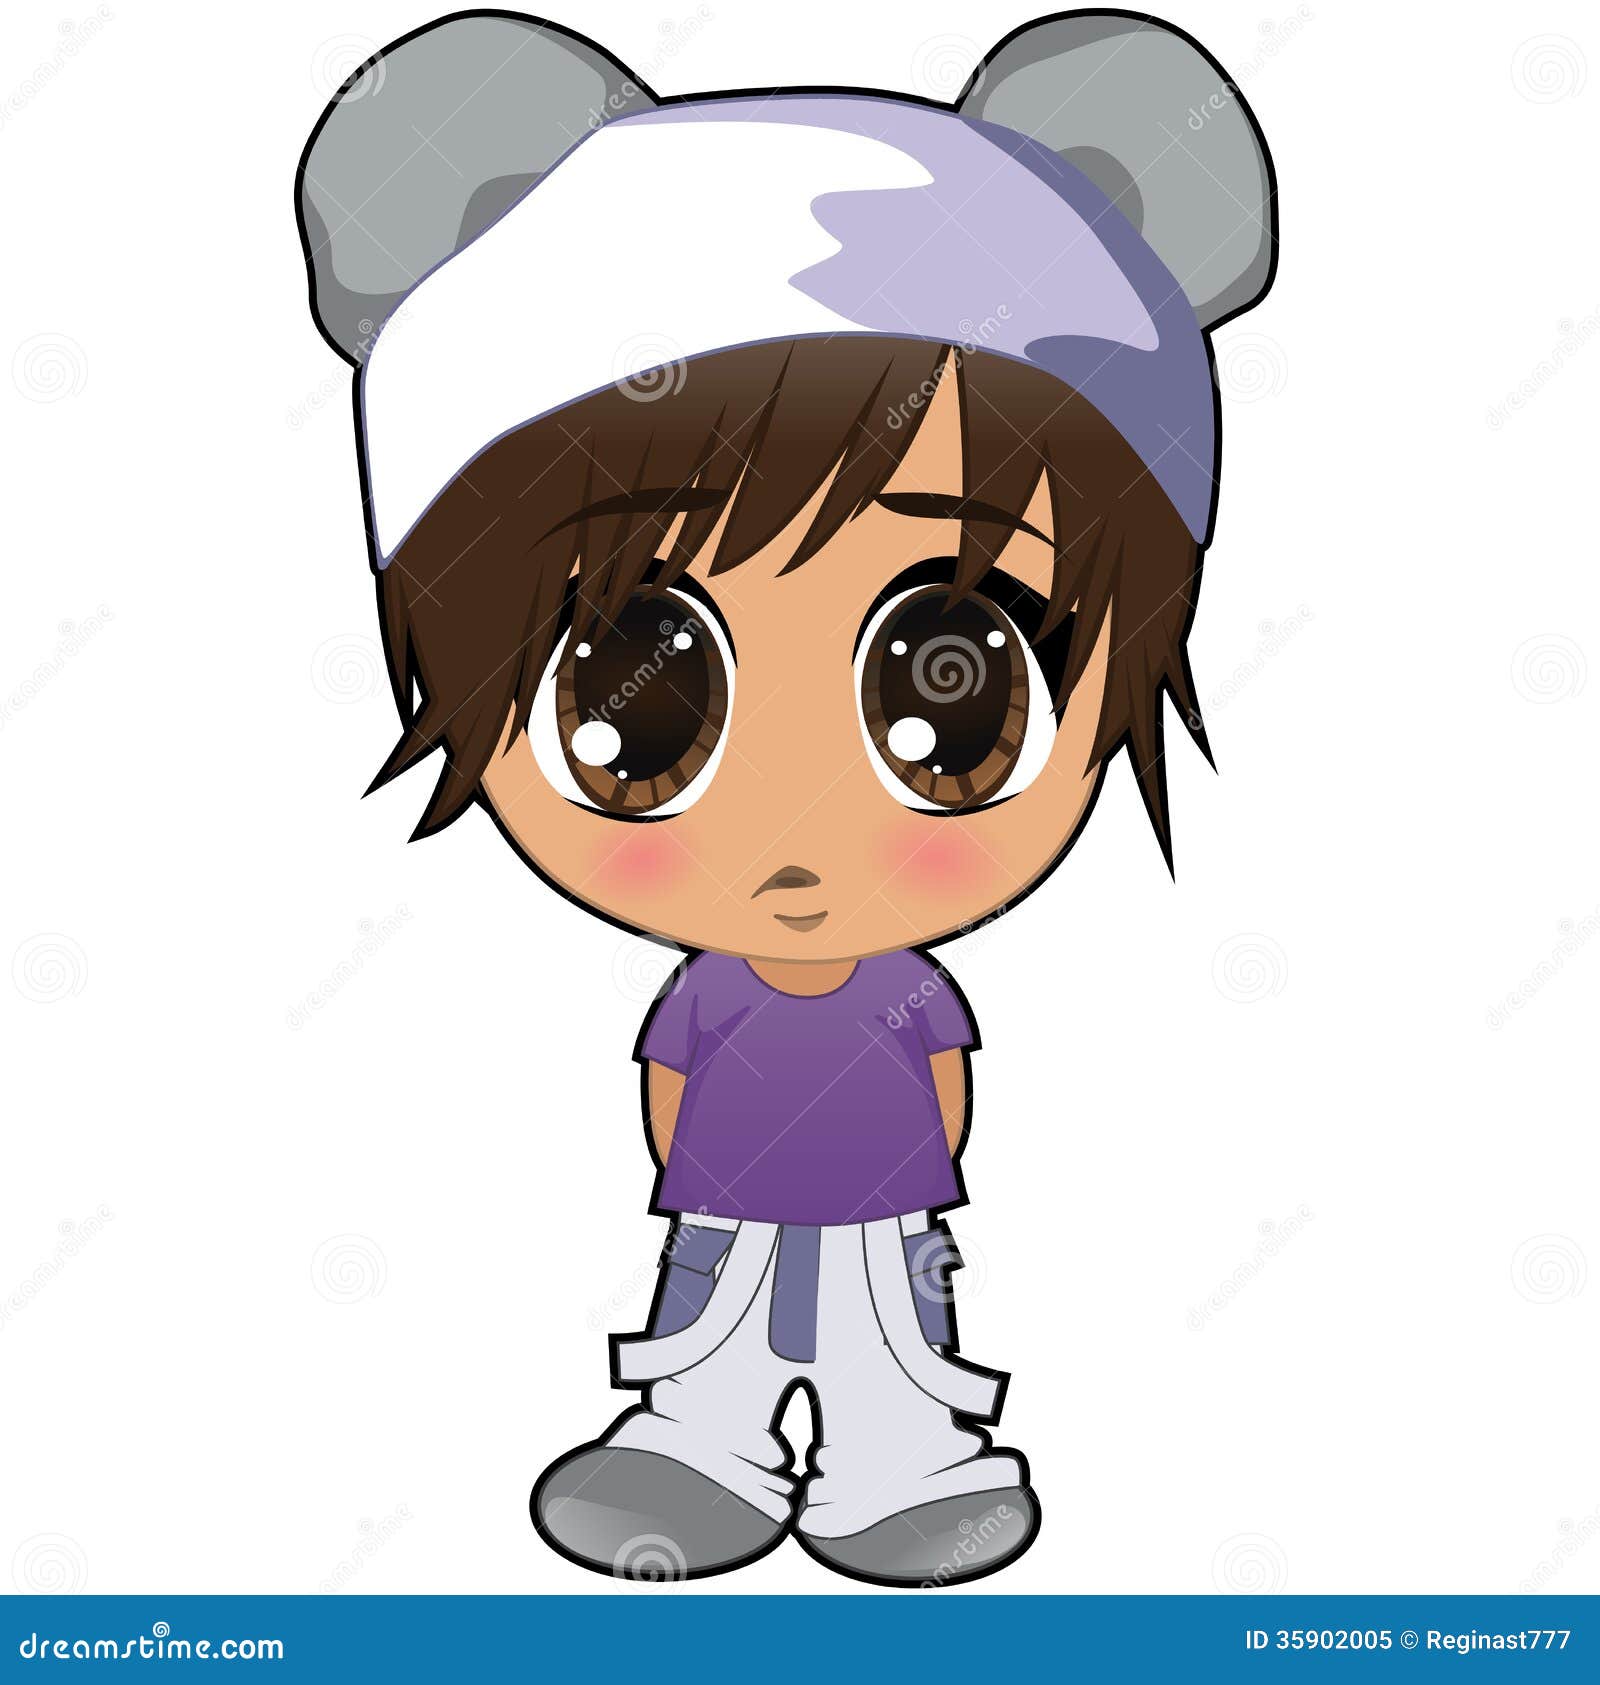 Anime boy stock vector. Illustration of computer, happiness - 35902005